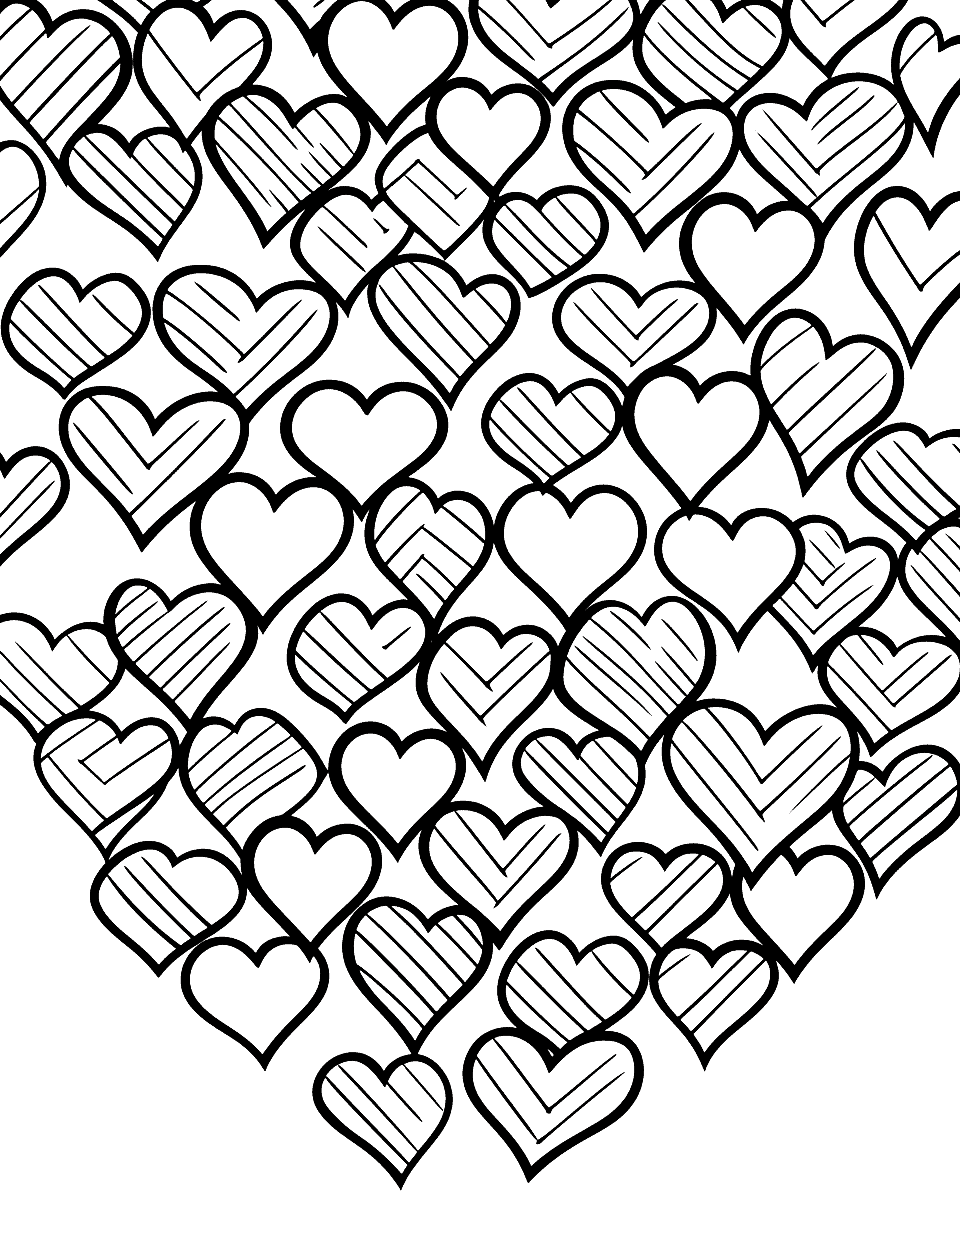 Small Hearts Pattern Heart Coloring Page - A page filled with small hearts that can be colored in a pattern or randomly.